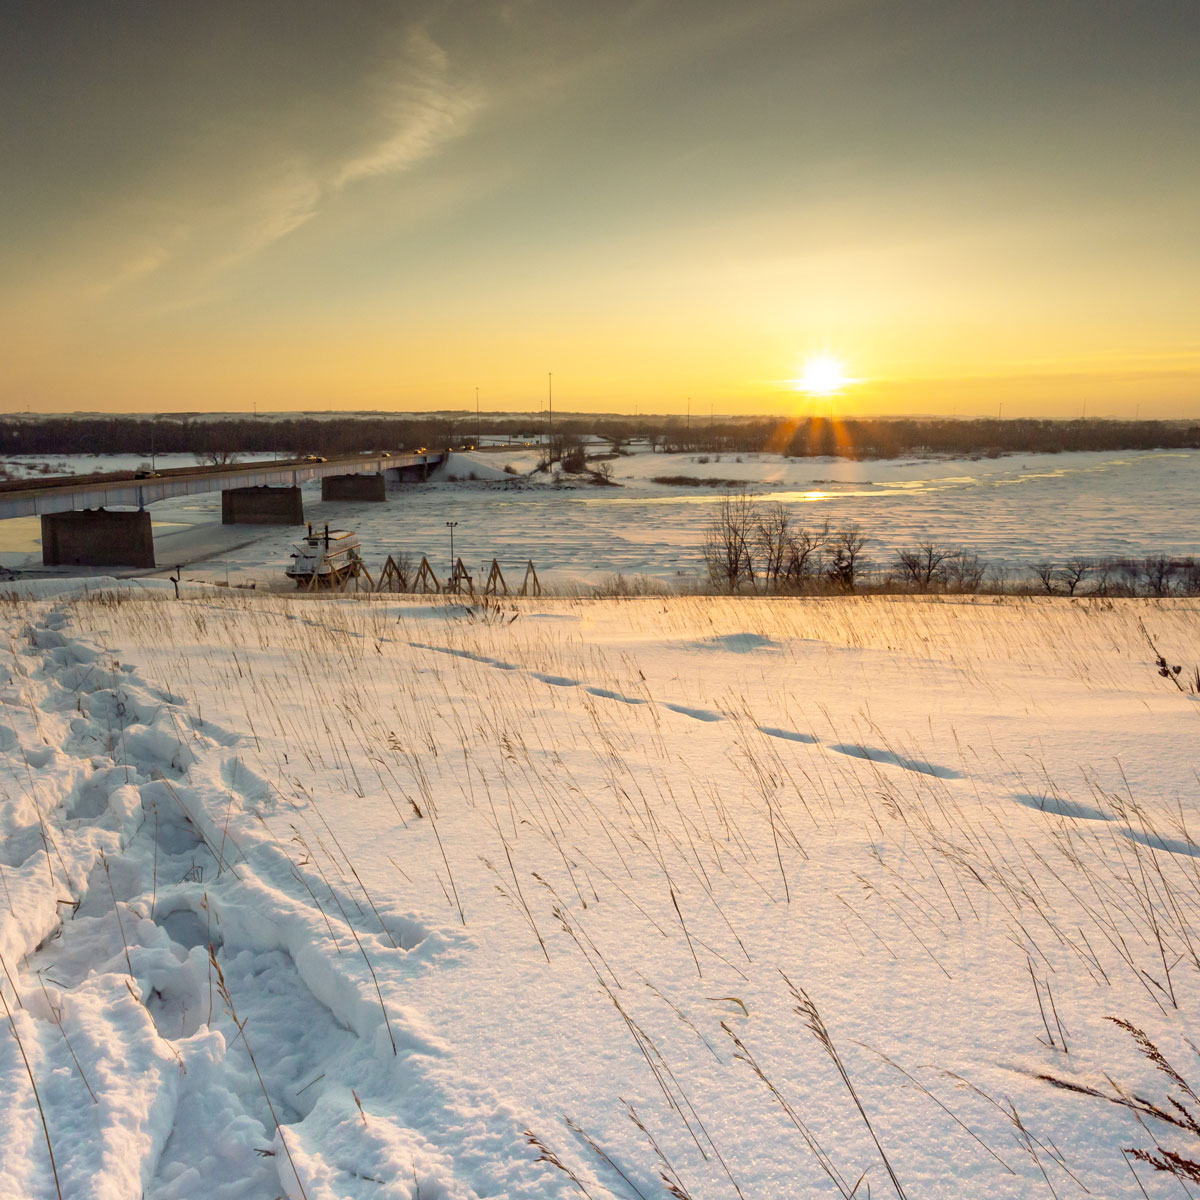 From a hilltop overlooking a frozen Missouri River and Keelboat Park in Bismarck, North Dakota a winter sunset brings golden colors to the sky and the reeds of grass that peek out above in the snow.